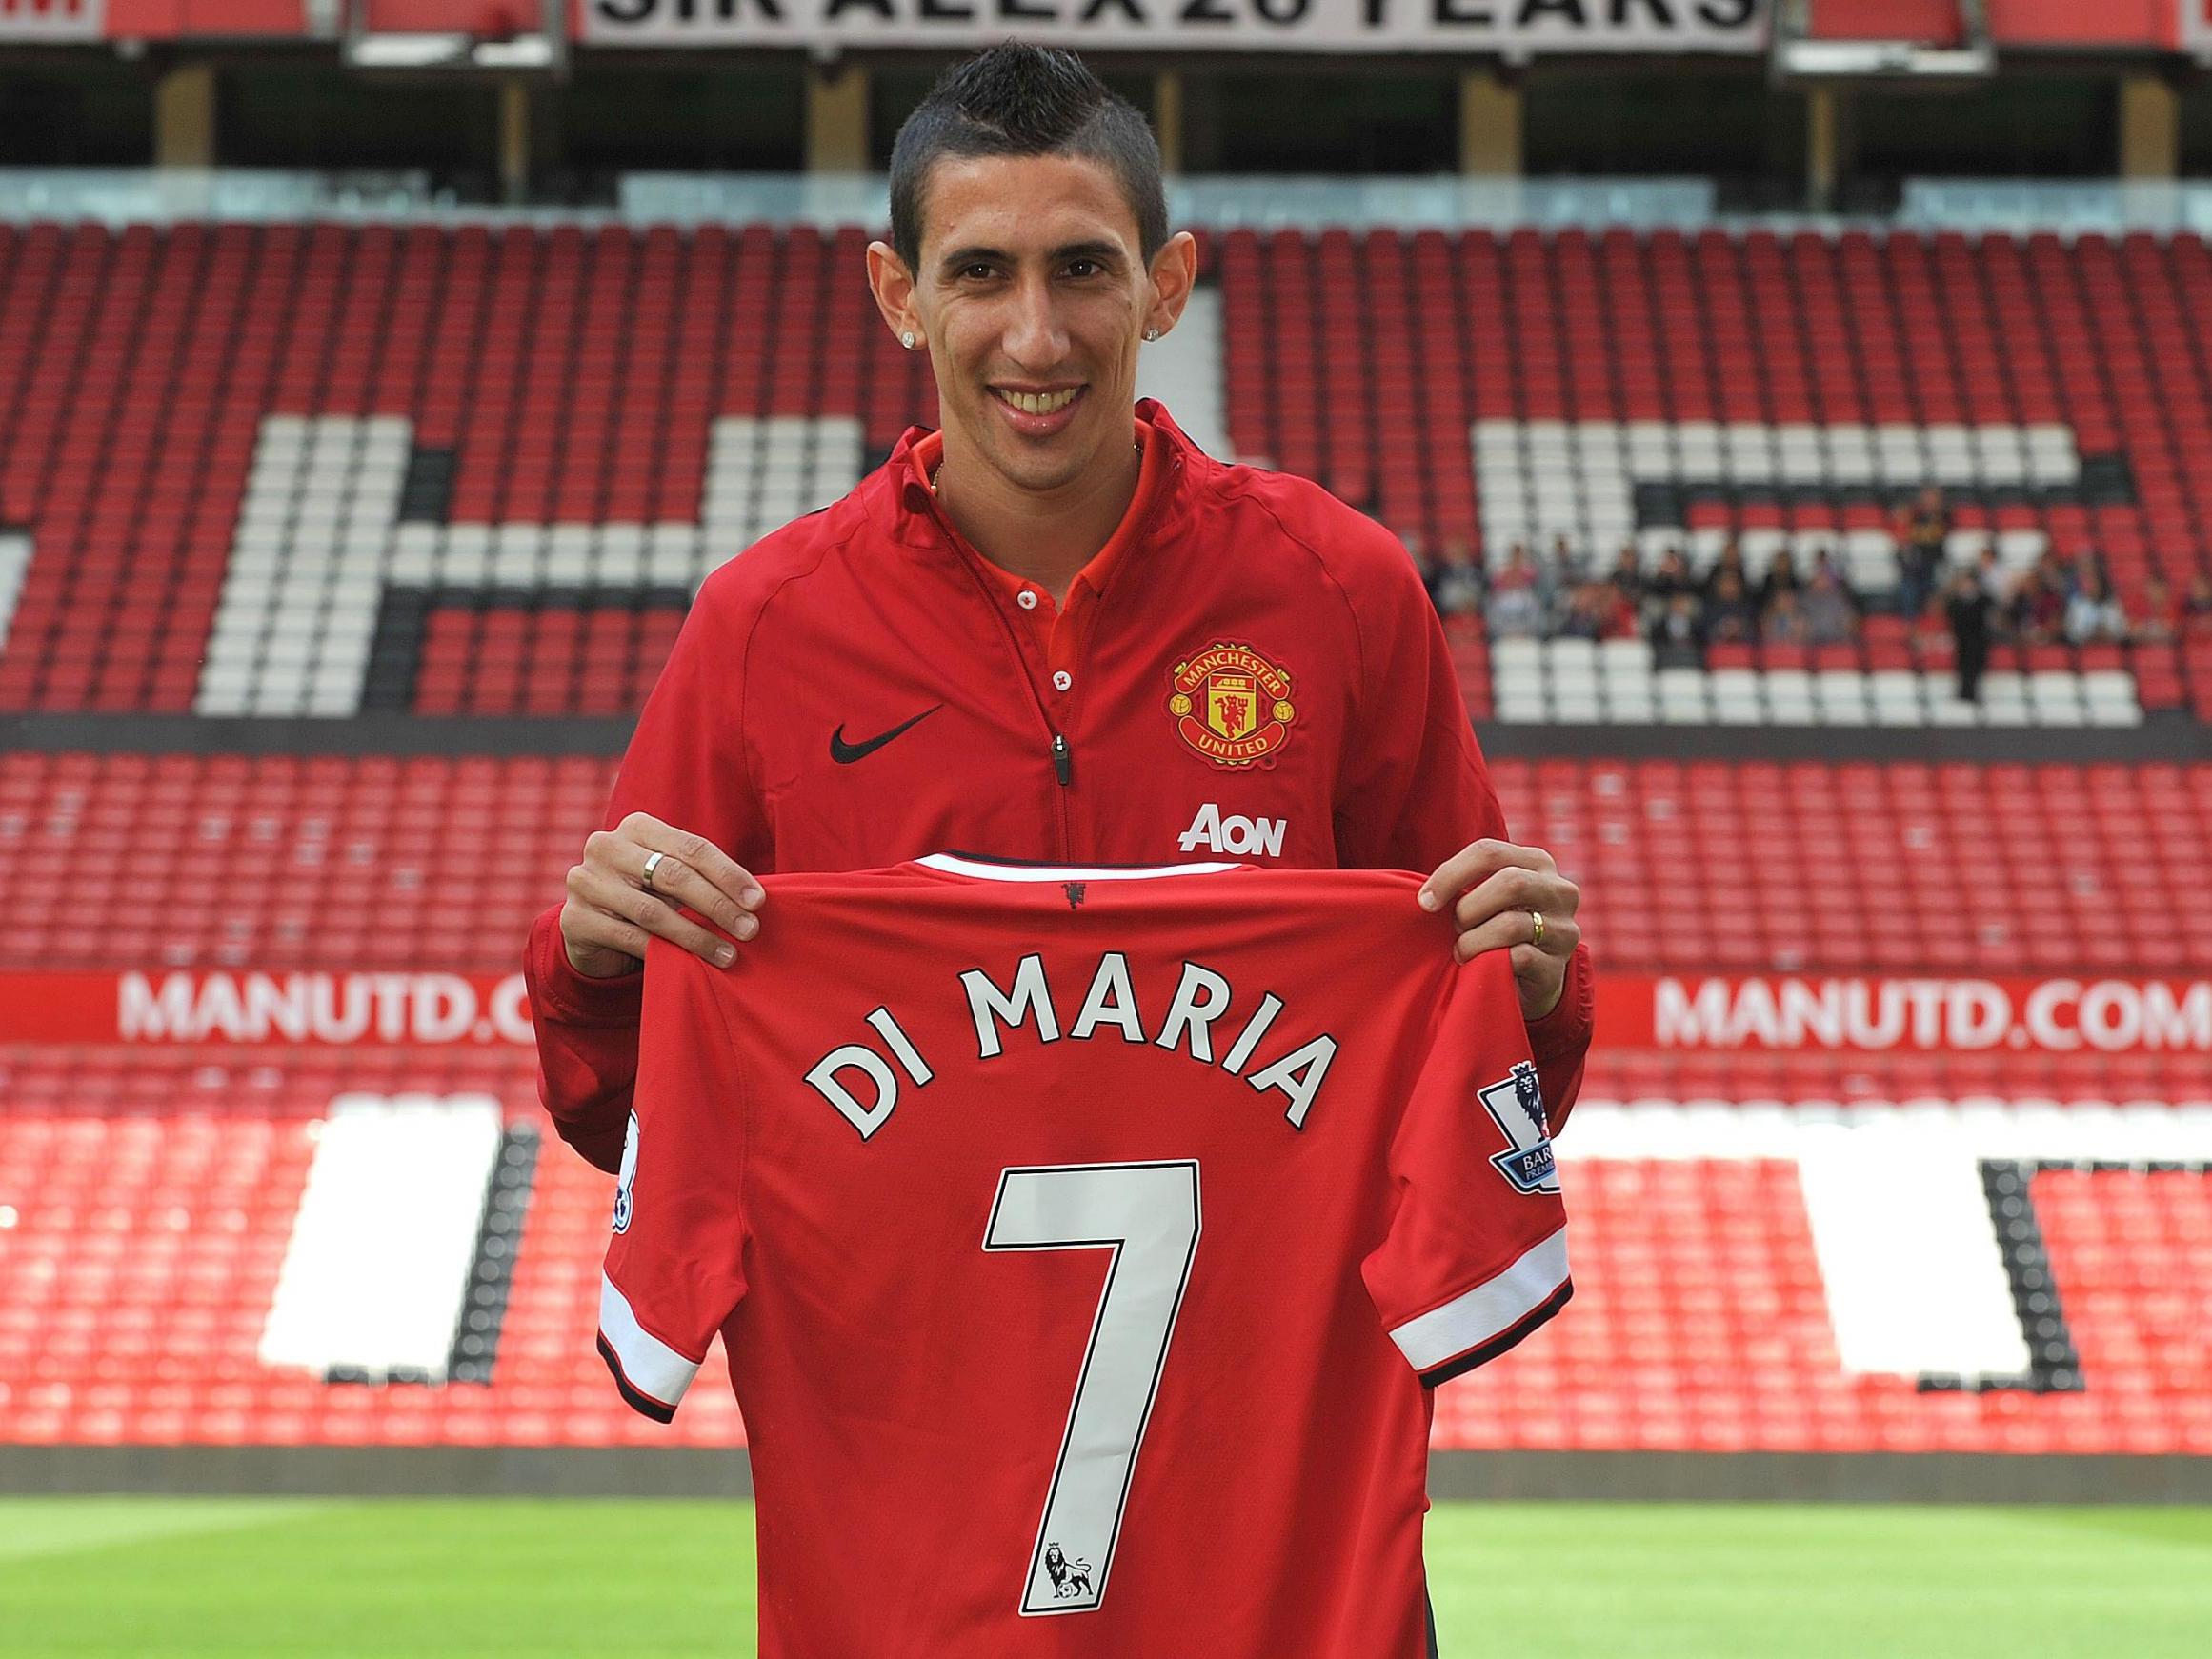 Di Maria arrived at Old Trafford with much fanfare